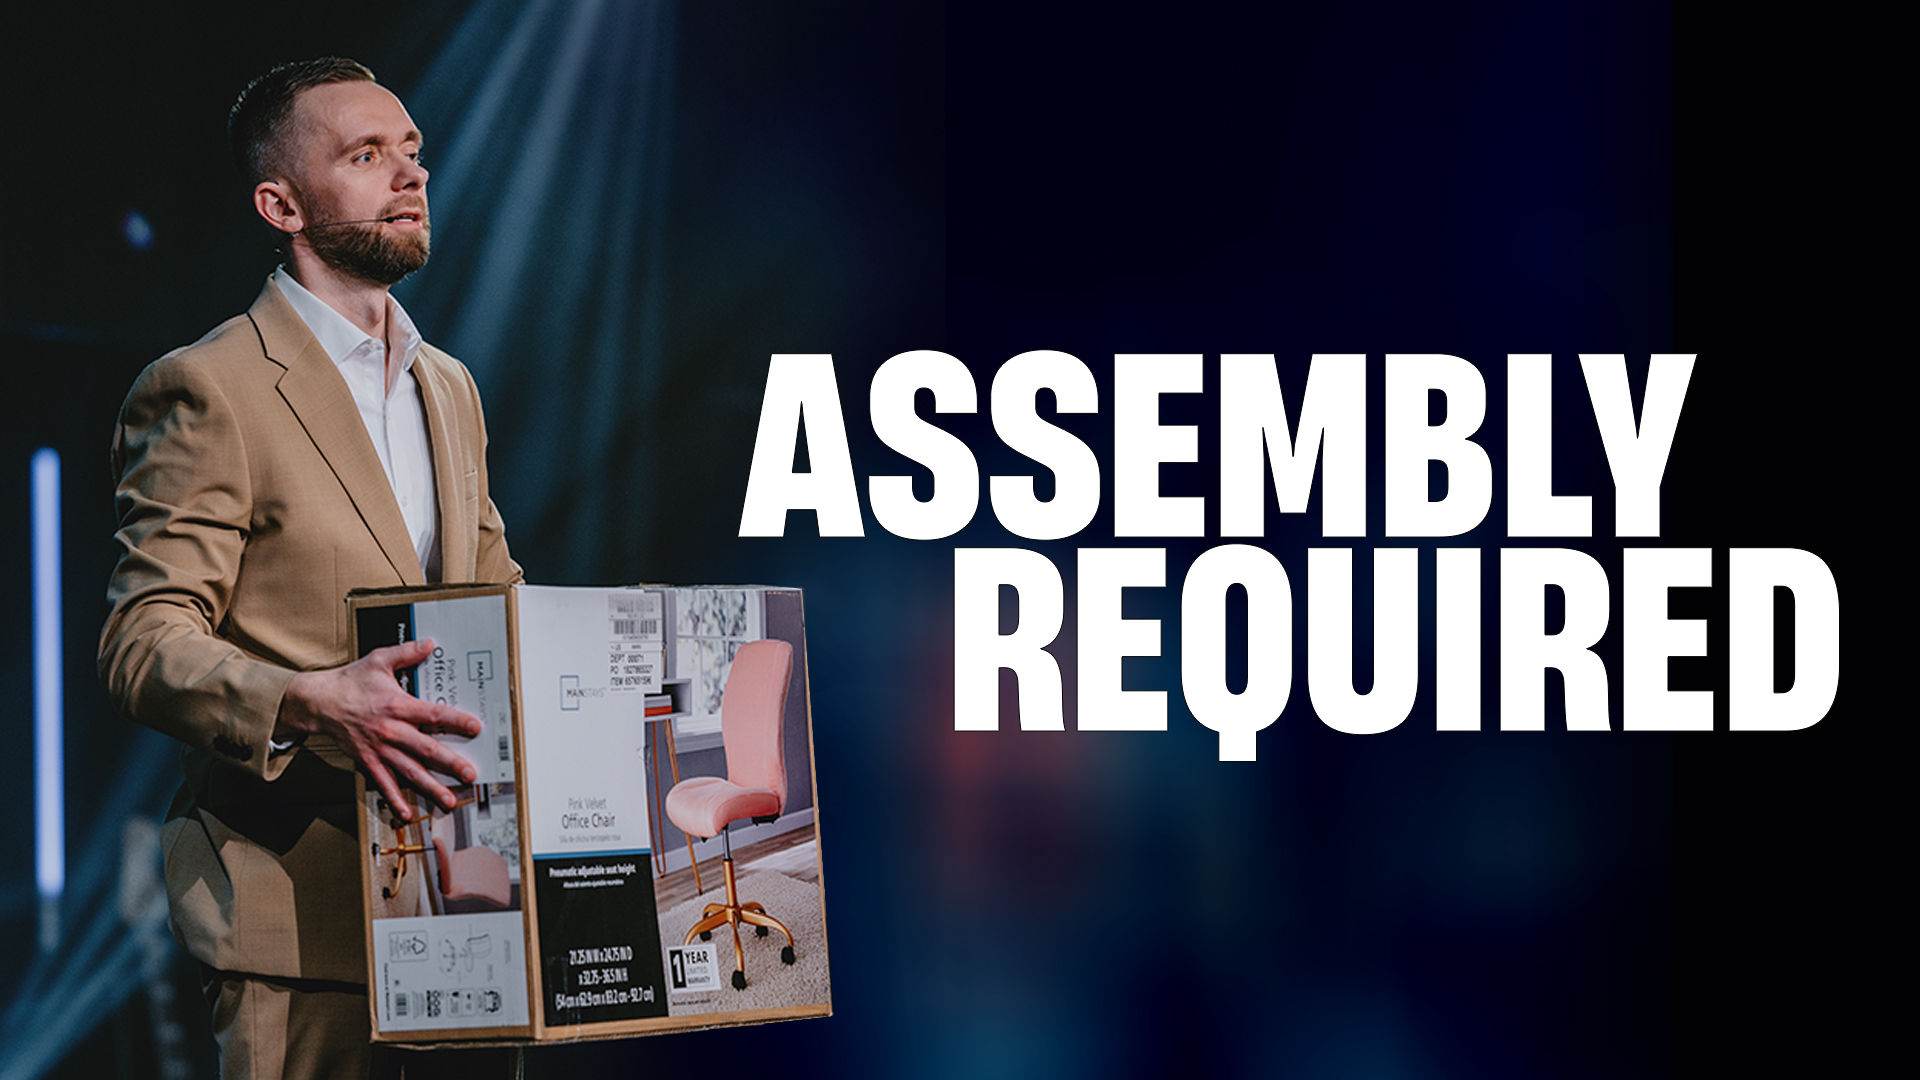 Featured Image for “Assembly Required”